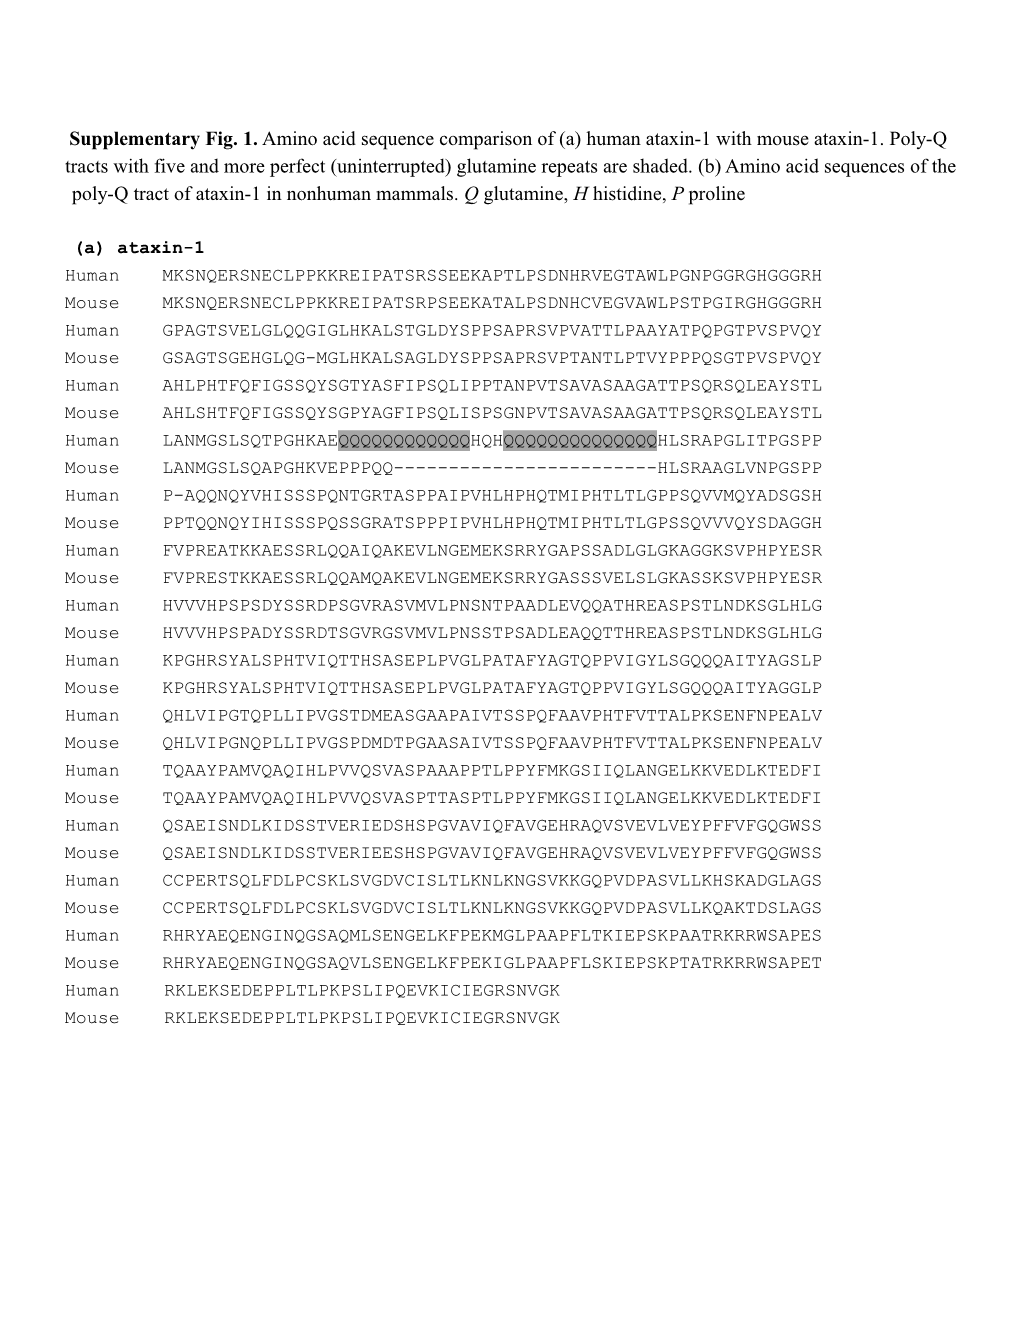 Supplementary Fig. 1. Amino Acid Sequence Comparison of (A) Human Ataxin-1 with Mouse